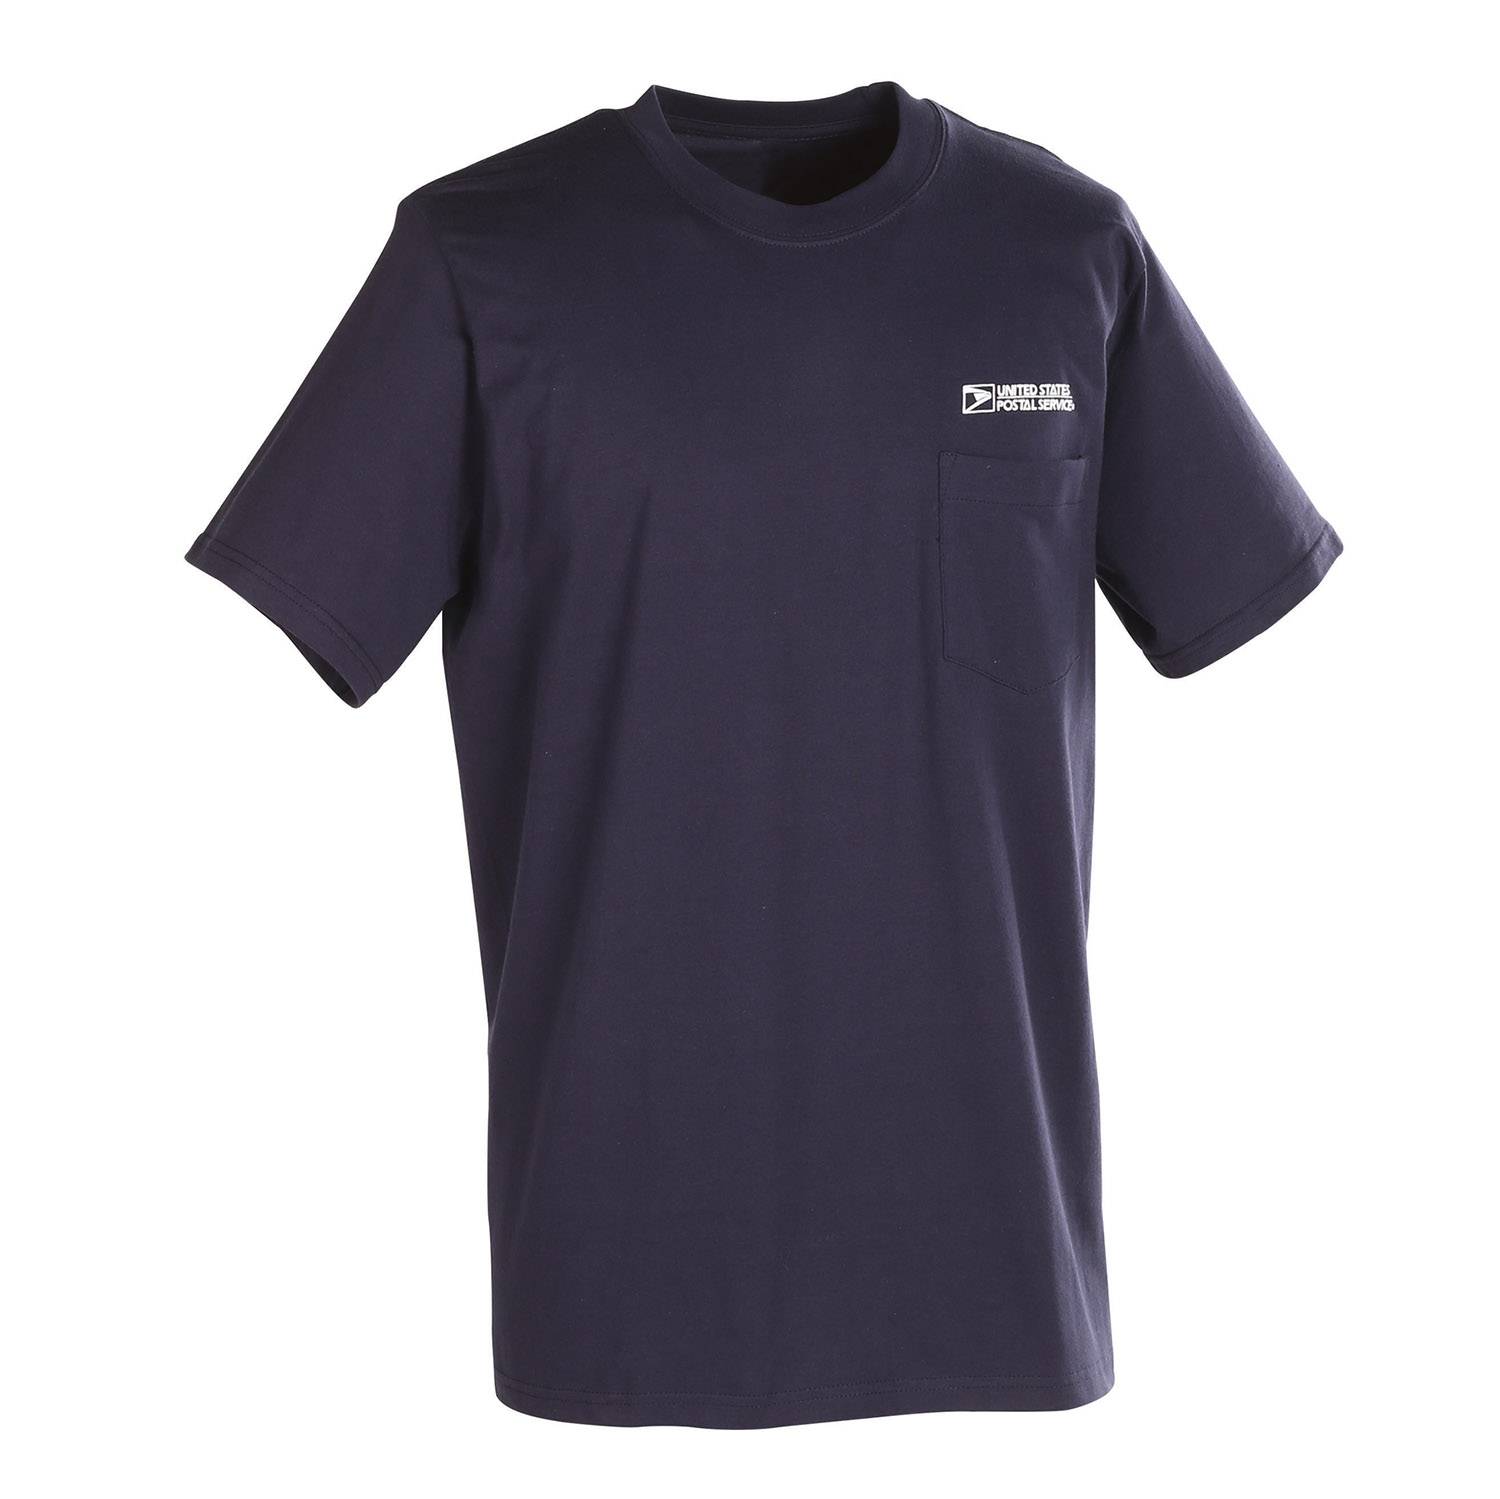 Postal T Shirt for Mail Handlers and Maintenance Personnel (